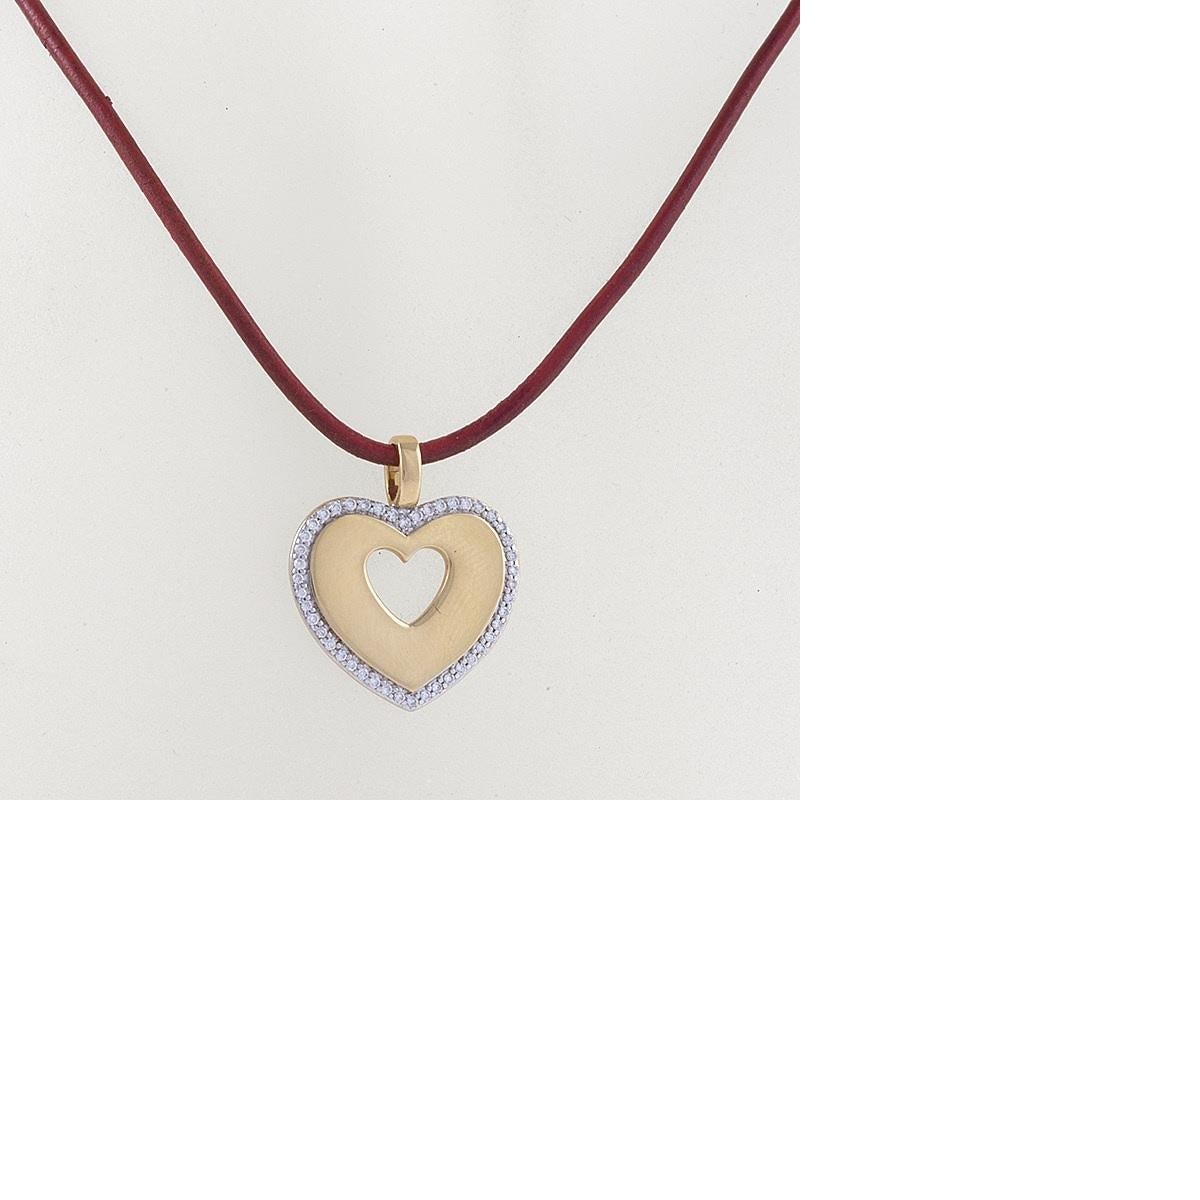 A French modern 18 karat yellow gold and red leather cord pendant necklace with diamonds by Poiray. The heart pendant necklace has round diamonds with an approximate total weight of .25 carat.  Circa Early 21st-Century. with New 18kt white gold